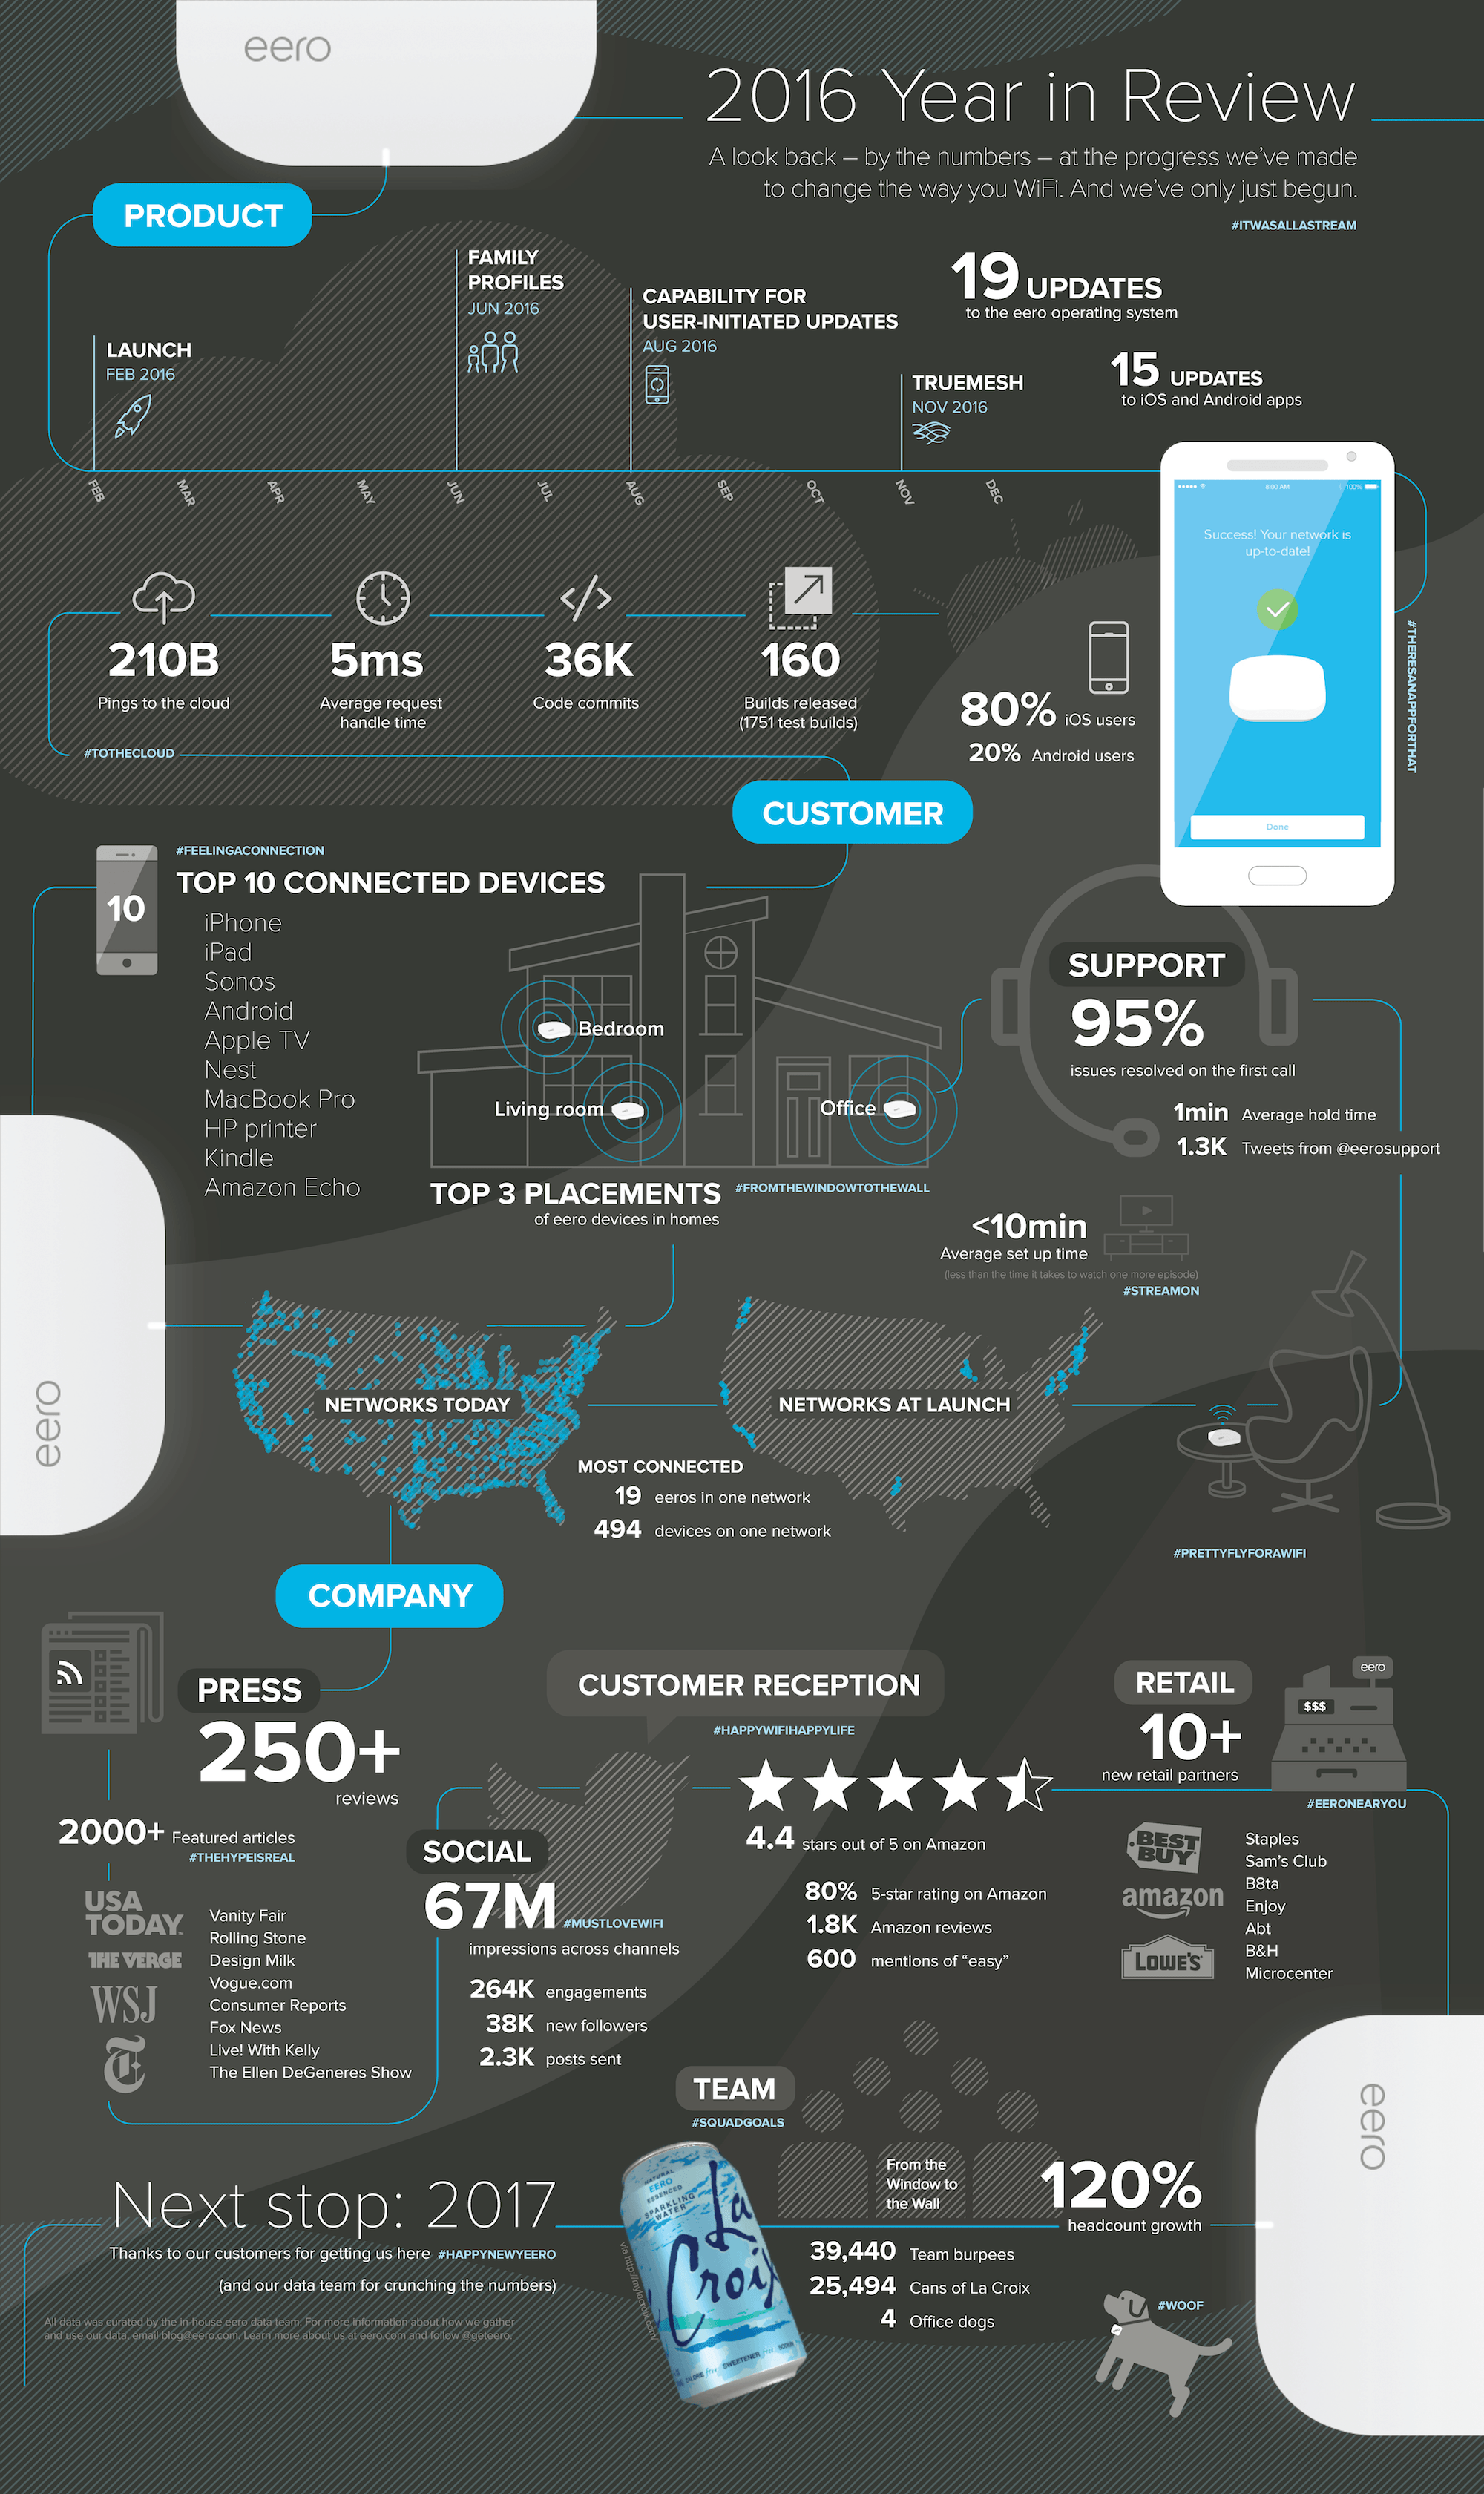 eero 2016 year in review infographic